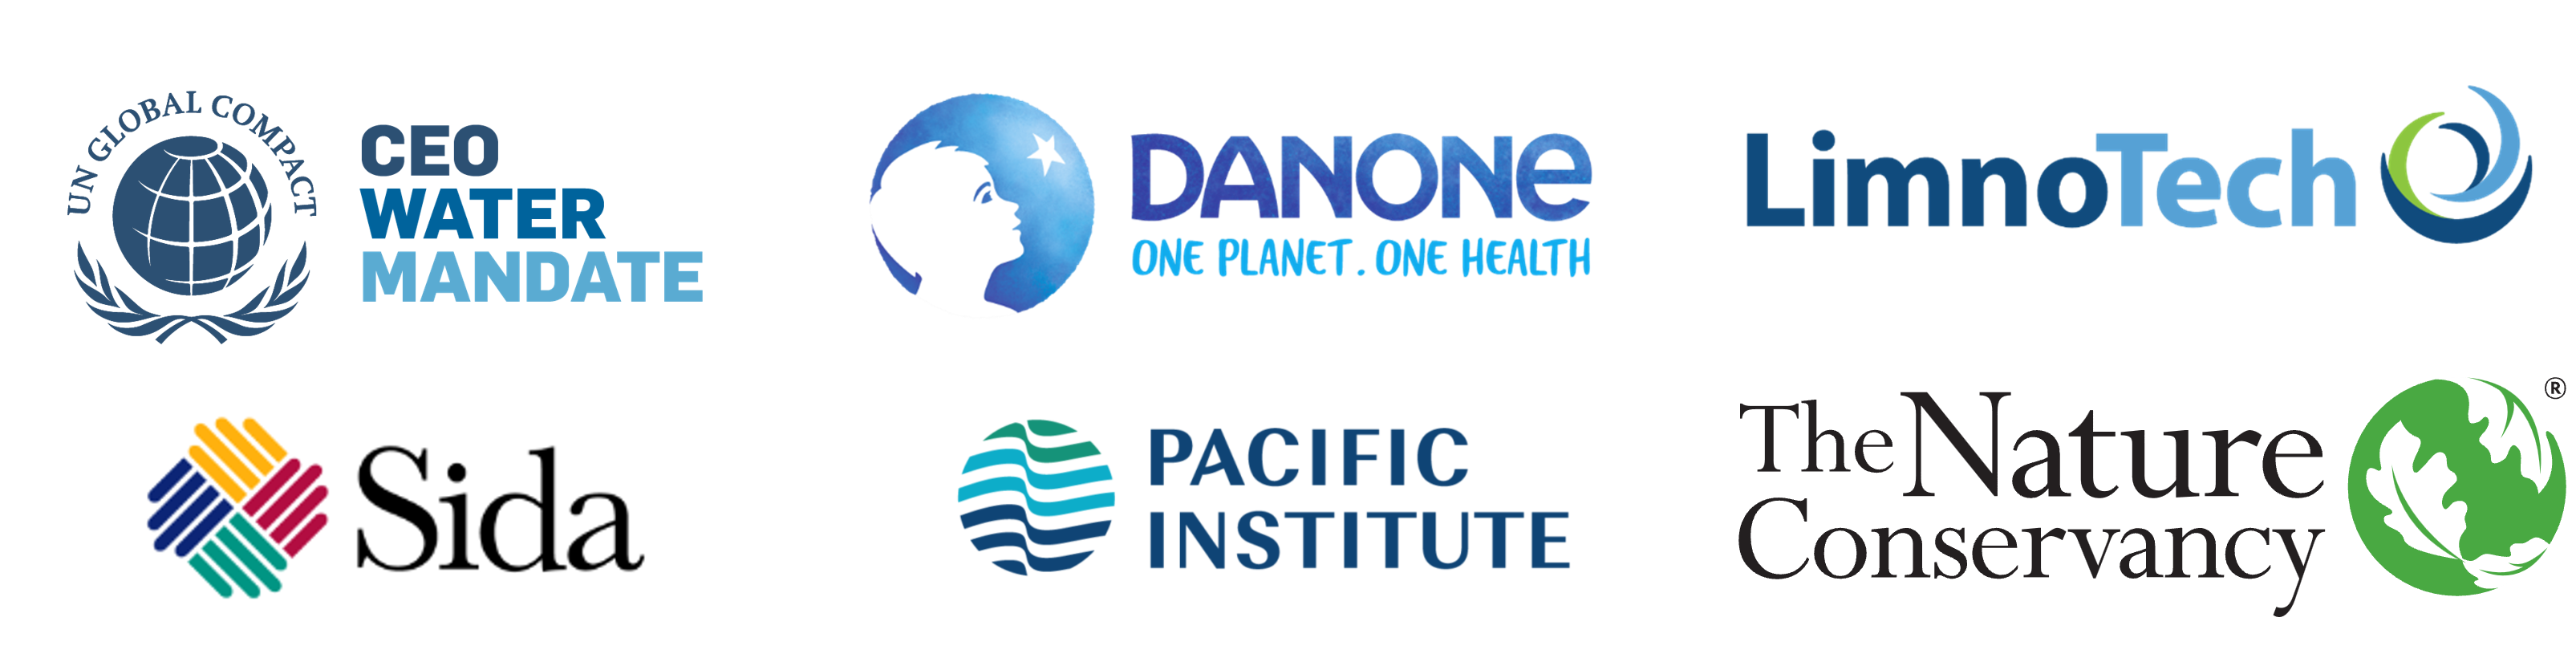 Logos of Partner Organizations: CEO Water Mandate, SIDA, Danone, LimnoTech, Pacific Institute, and the Nature Conservancy